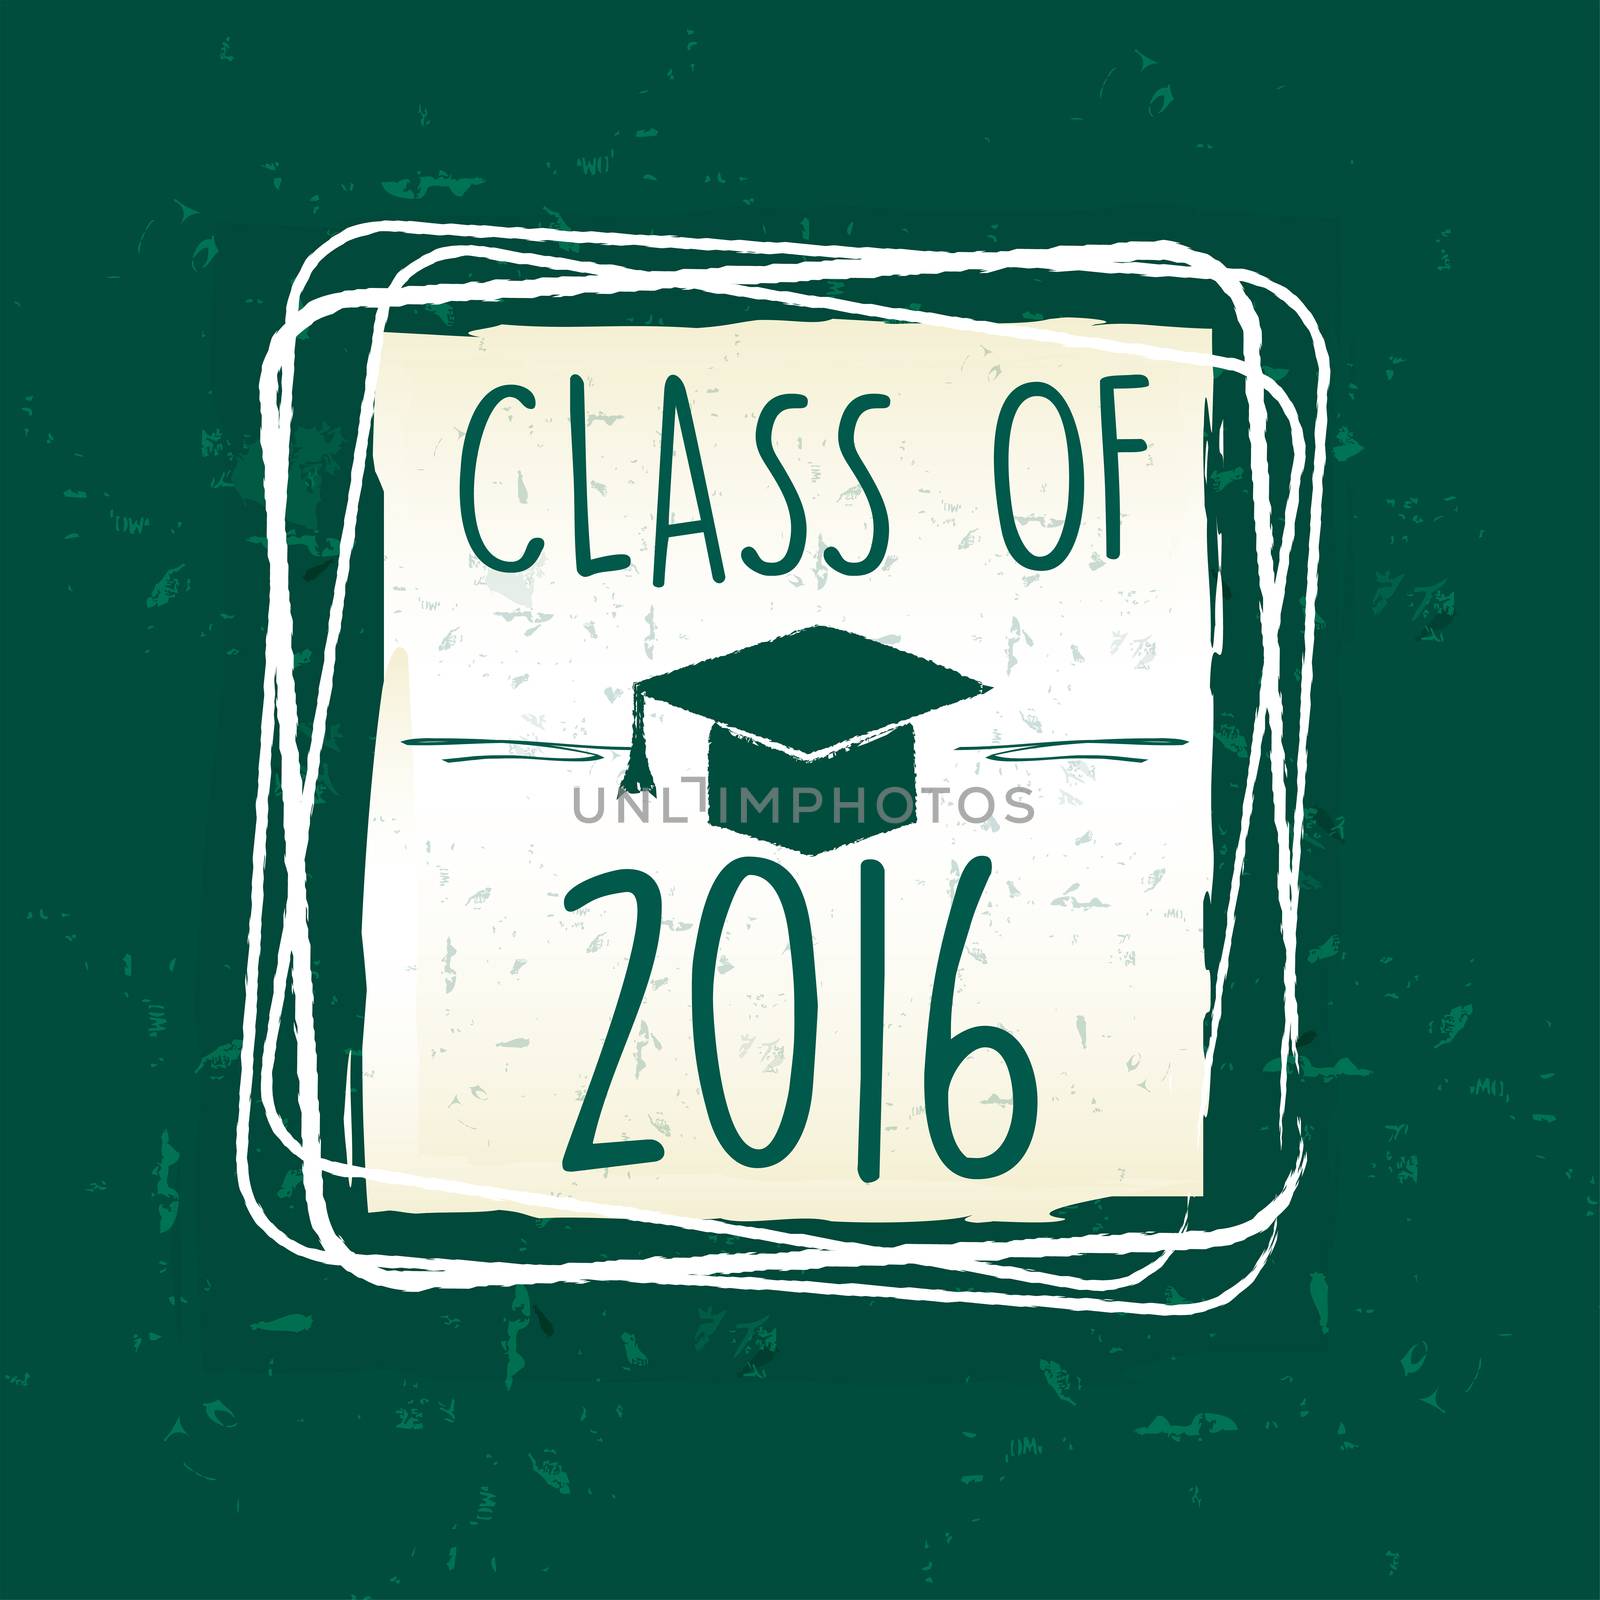 class of 2016 text with graduate cap with tassel - mortarboard, in frame over green old paper background, graduate education concept